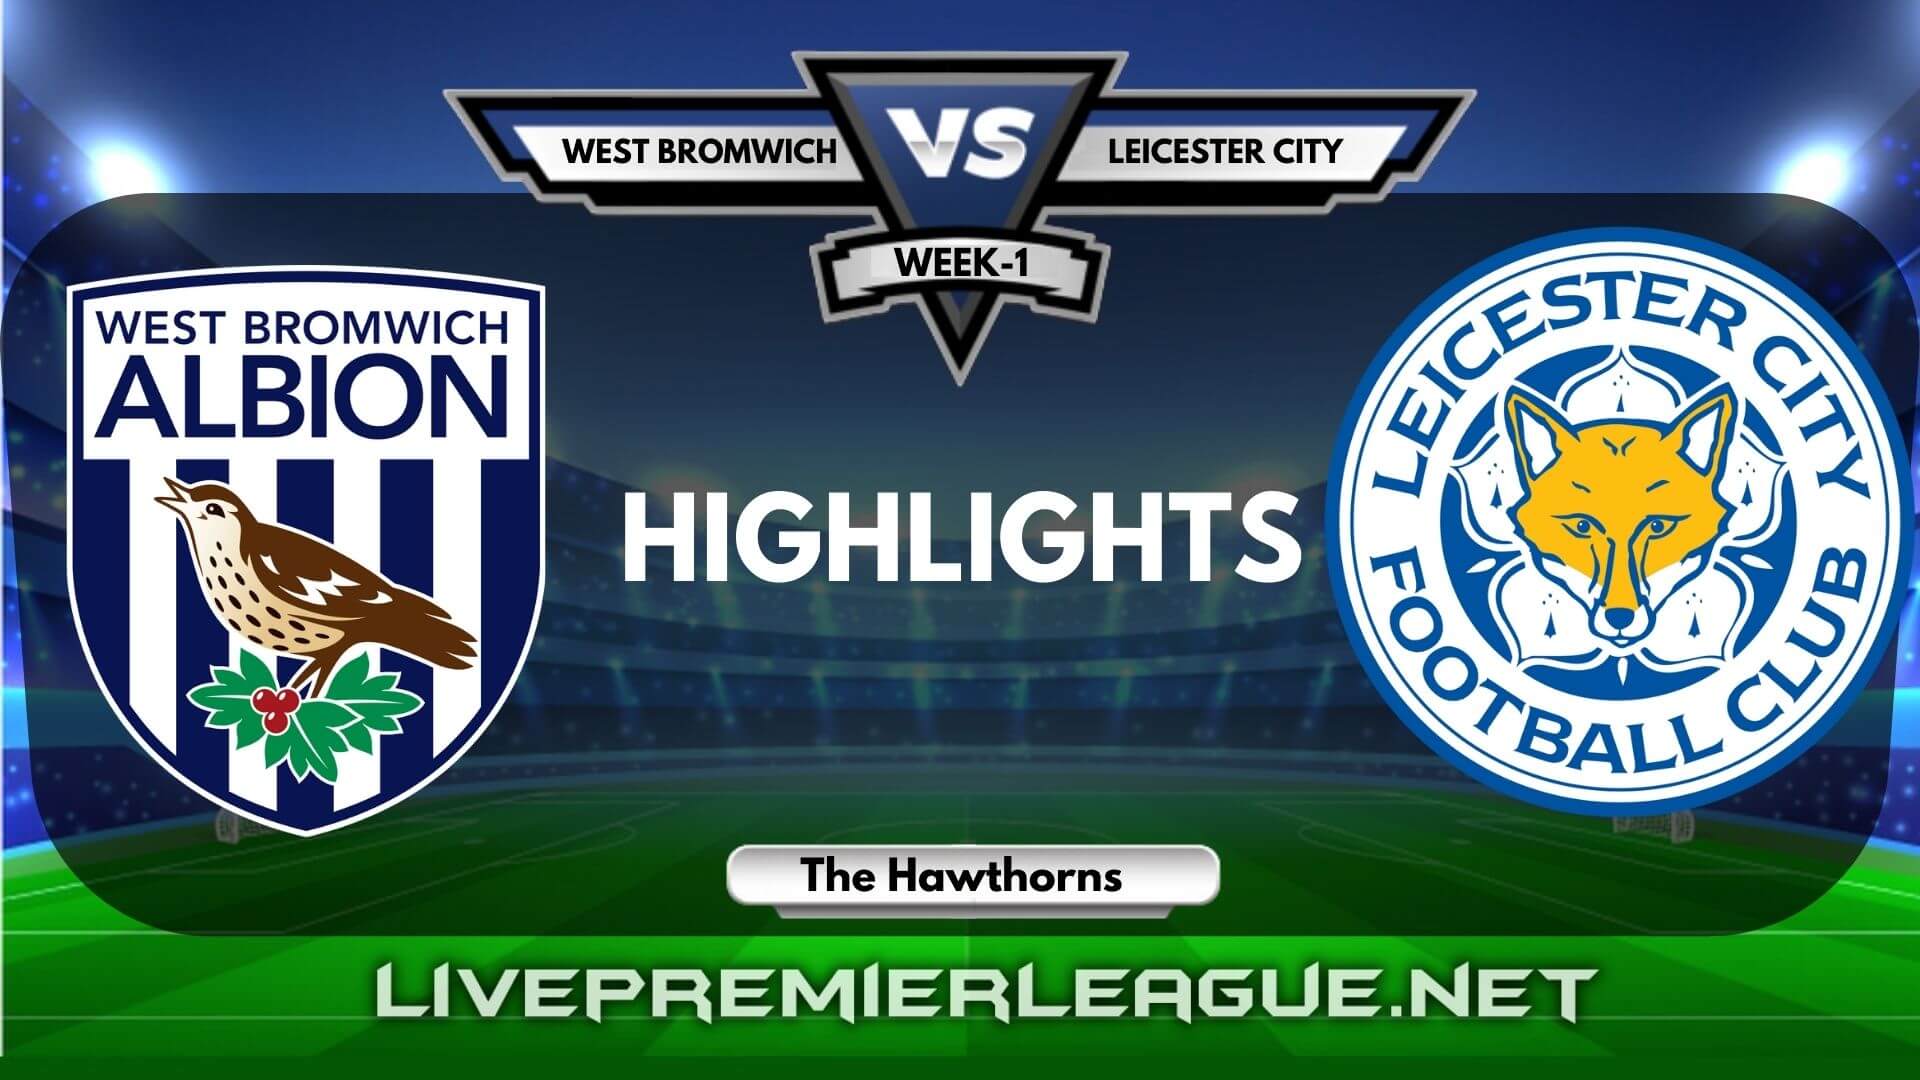 West Bromwich Vs Leicester City Highlights 2020 EPL Week 1